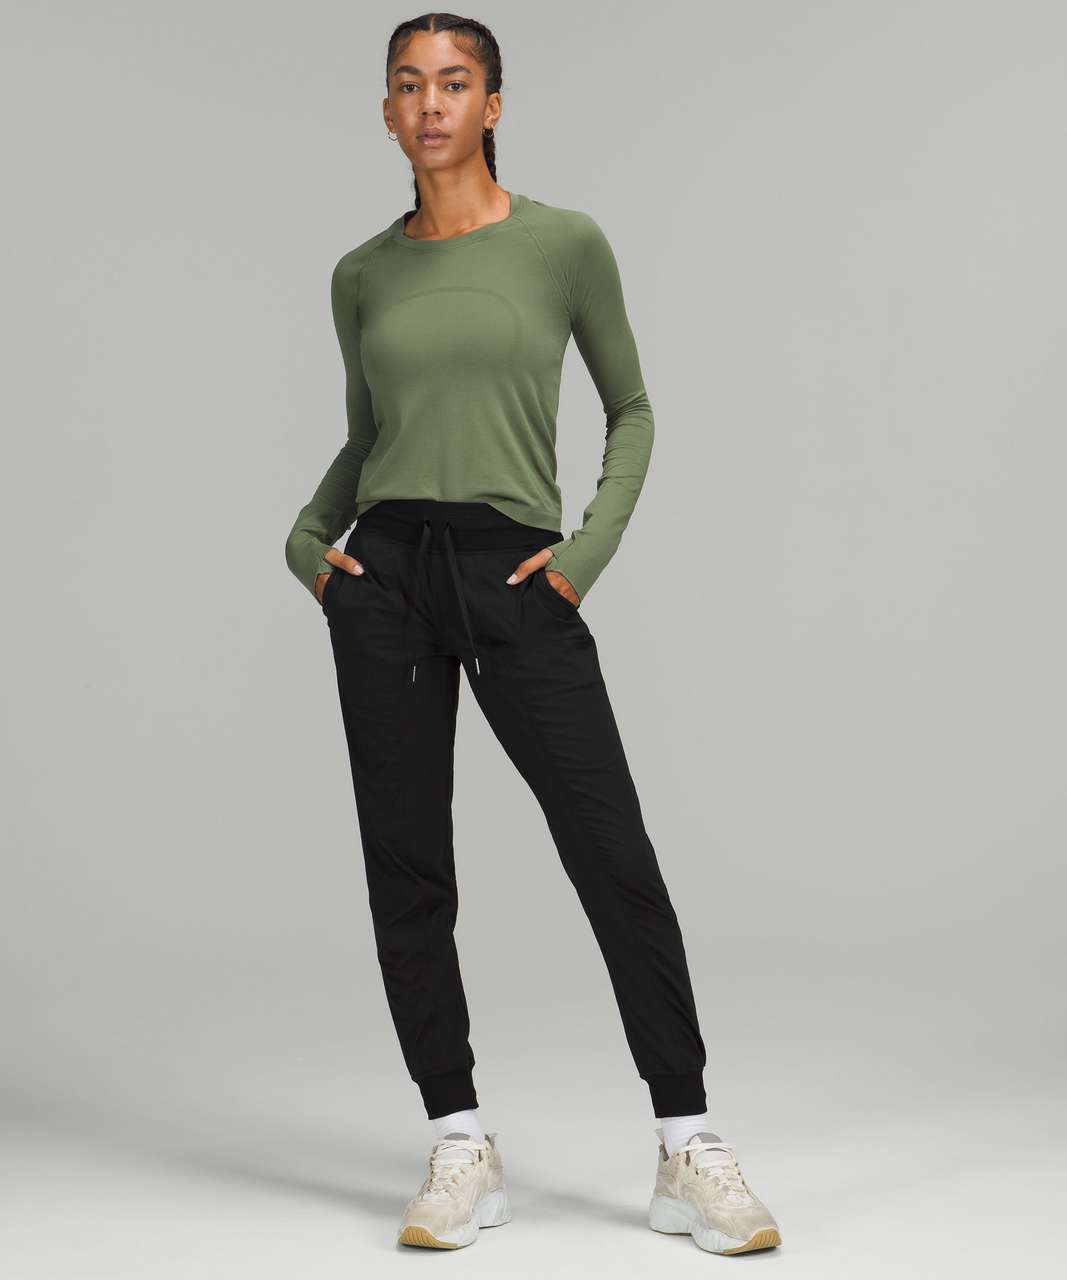 Lululemon Dance Studio Jogger Black Size 12 - $77 (21% Off Retail) New With  Tags - From Sophia